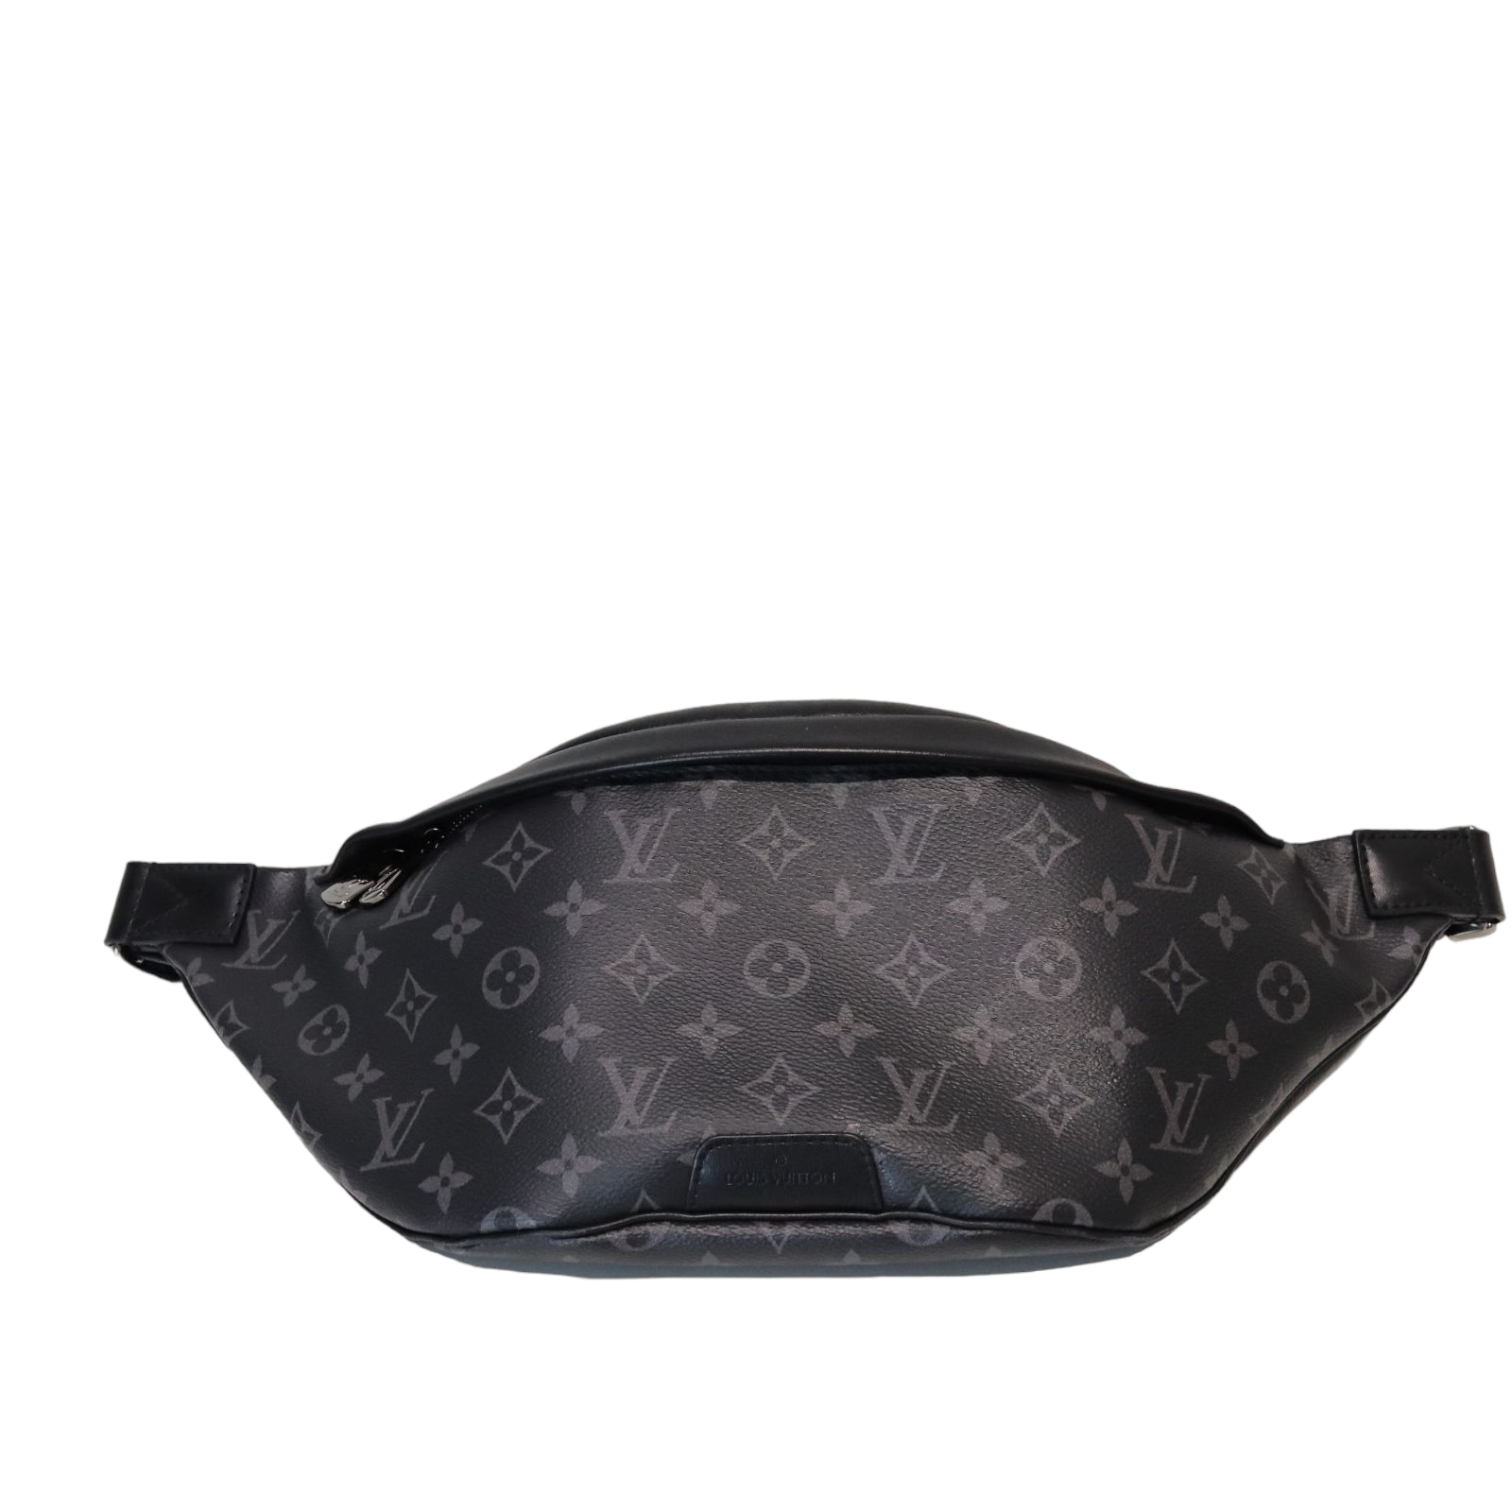 Louis Vuitton pre-owned Galaxy Discovery belt bag - ShopStyle